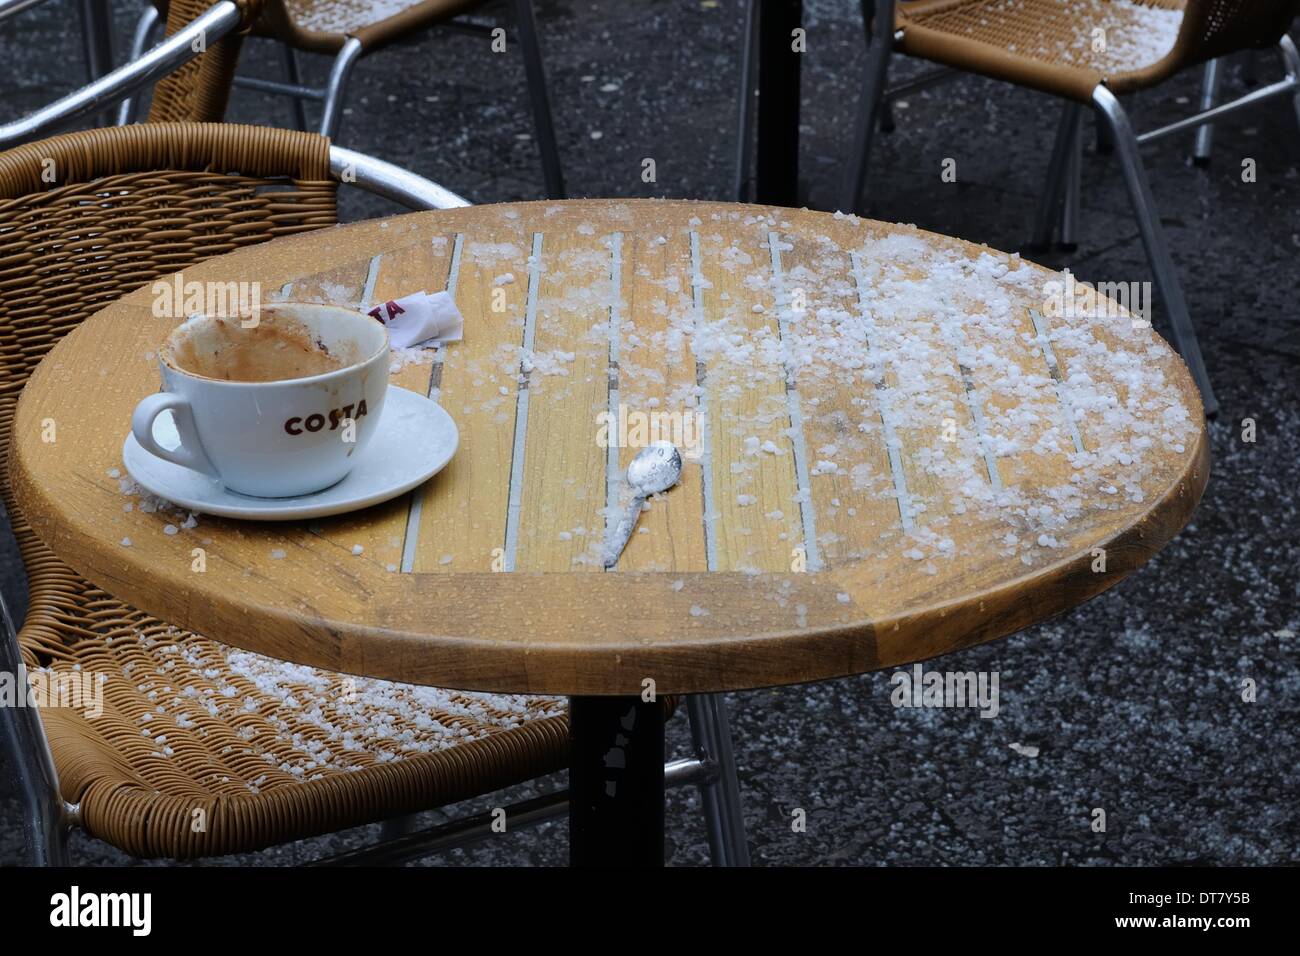 Sauchiehall Street, Glasgow, Scotland, UK.11th Feb, 2014. Glasgow suffers sudden wintery blast. Patrons of this outdoor Costa coffee cafe in Glasgow city centre dashed for cover when a sudden heavy hailstorm arrived this afternoon. Credit:  Douglas Carr/Alamy Live News Stock Photo